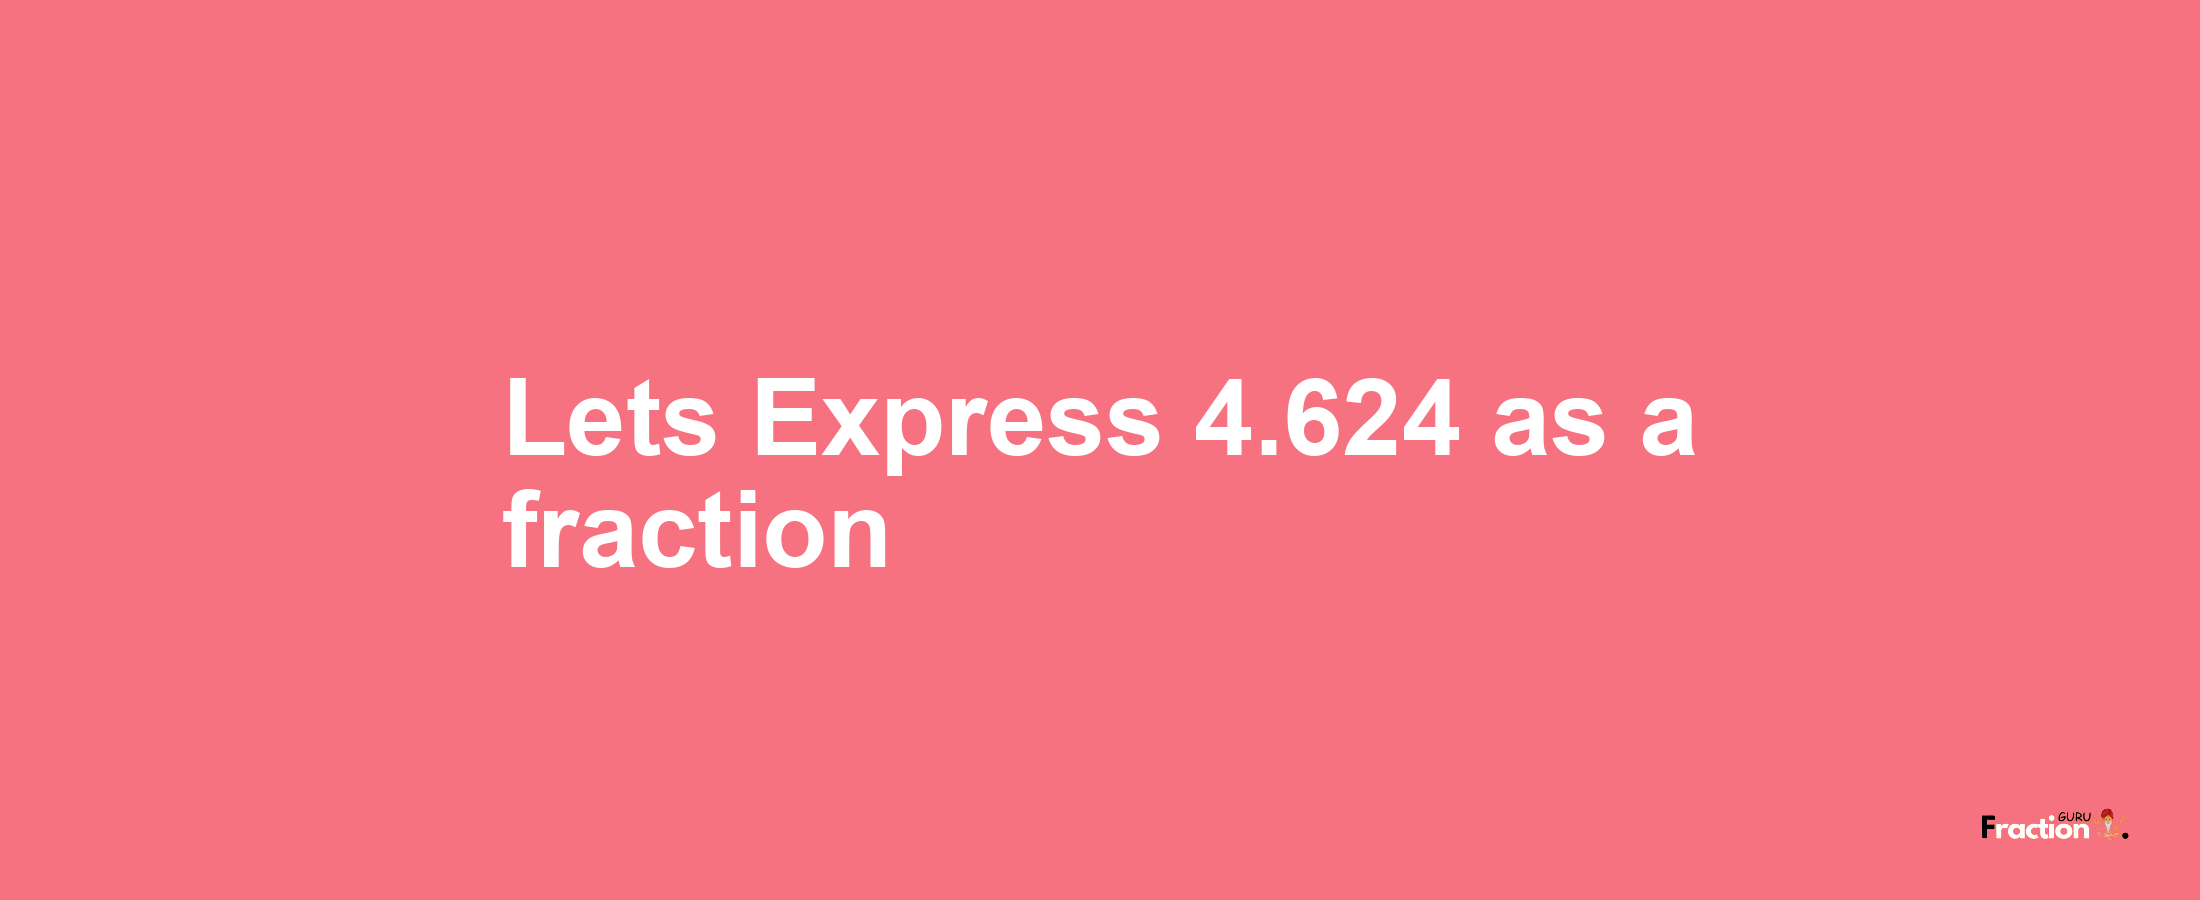 Lets Express 4.624 as afraction